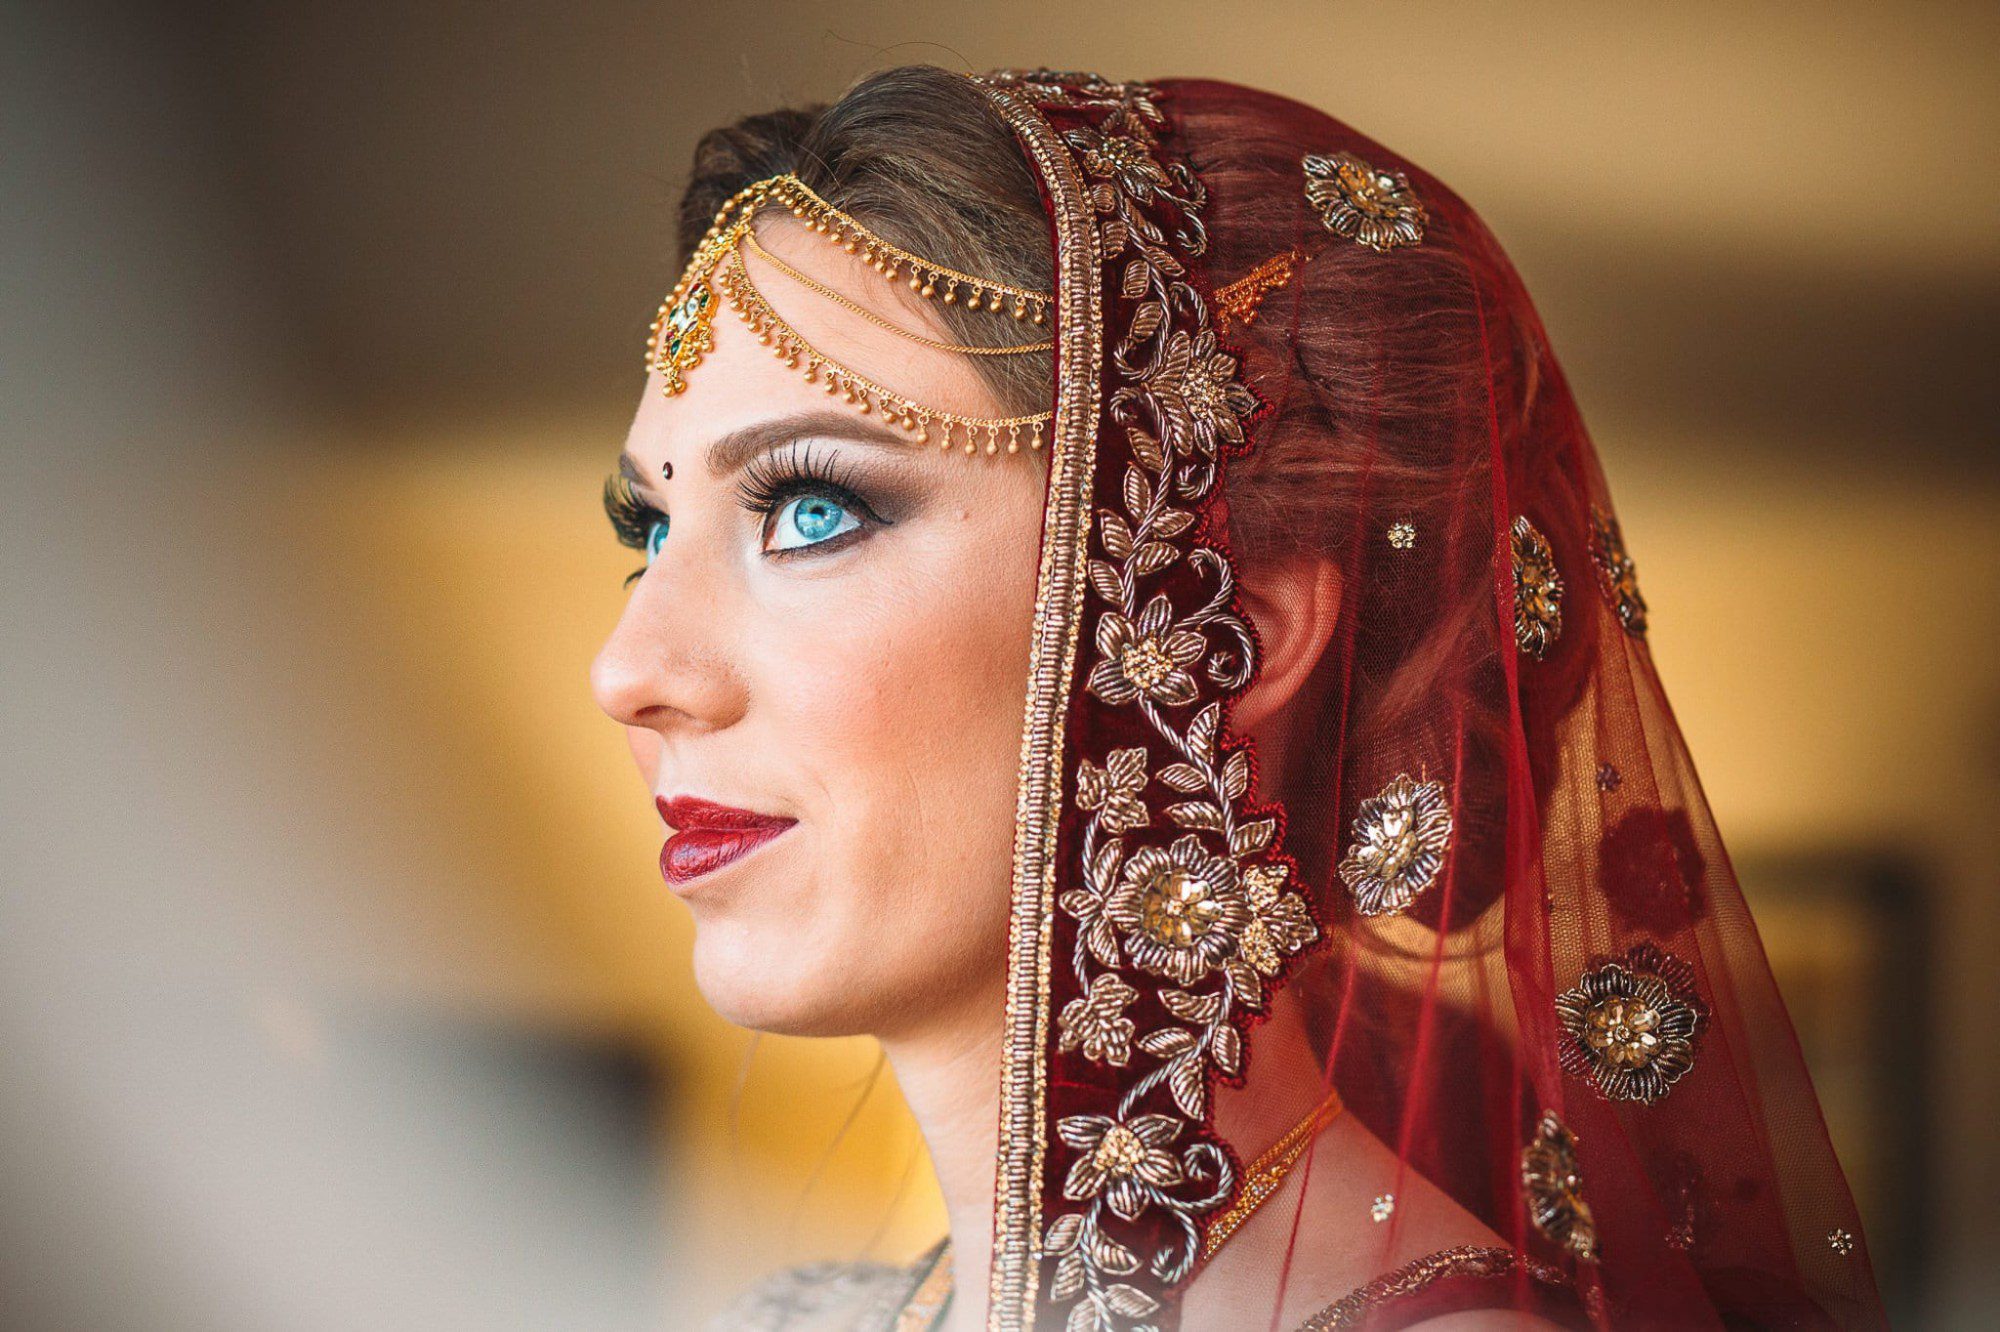 Indian bride looking out the window